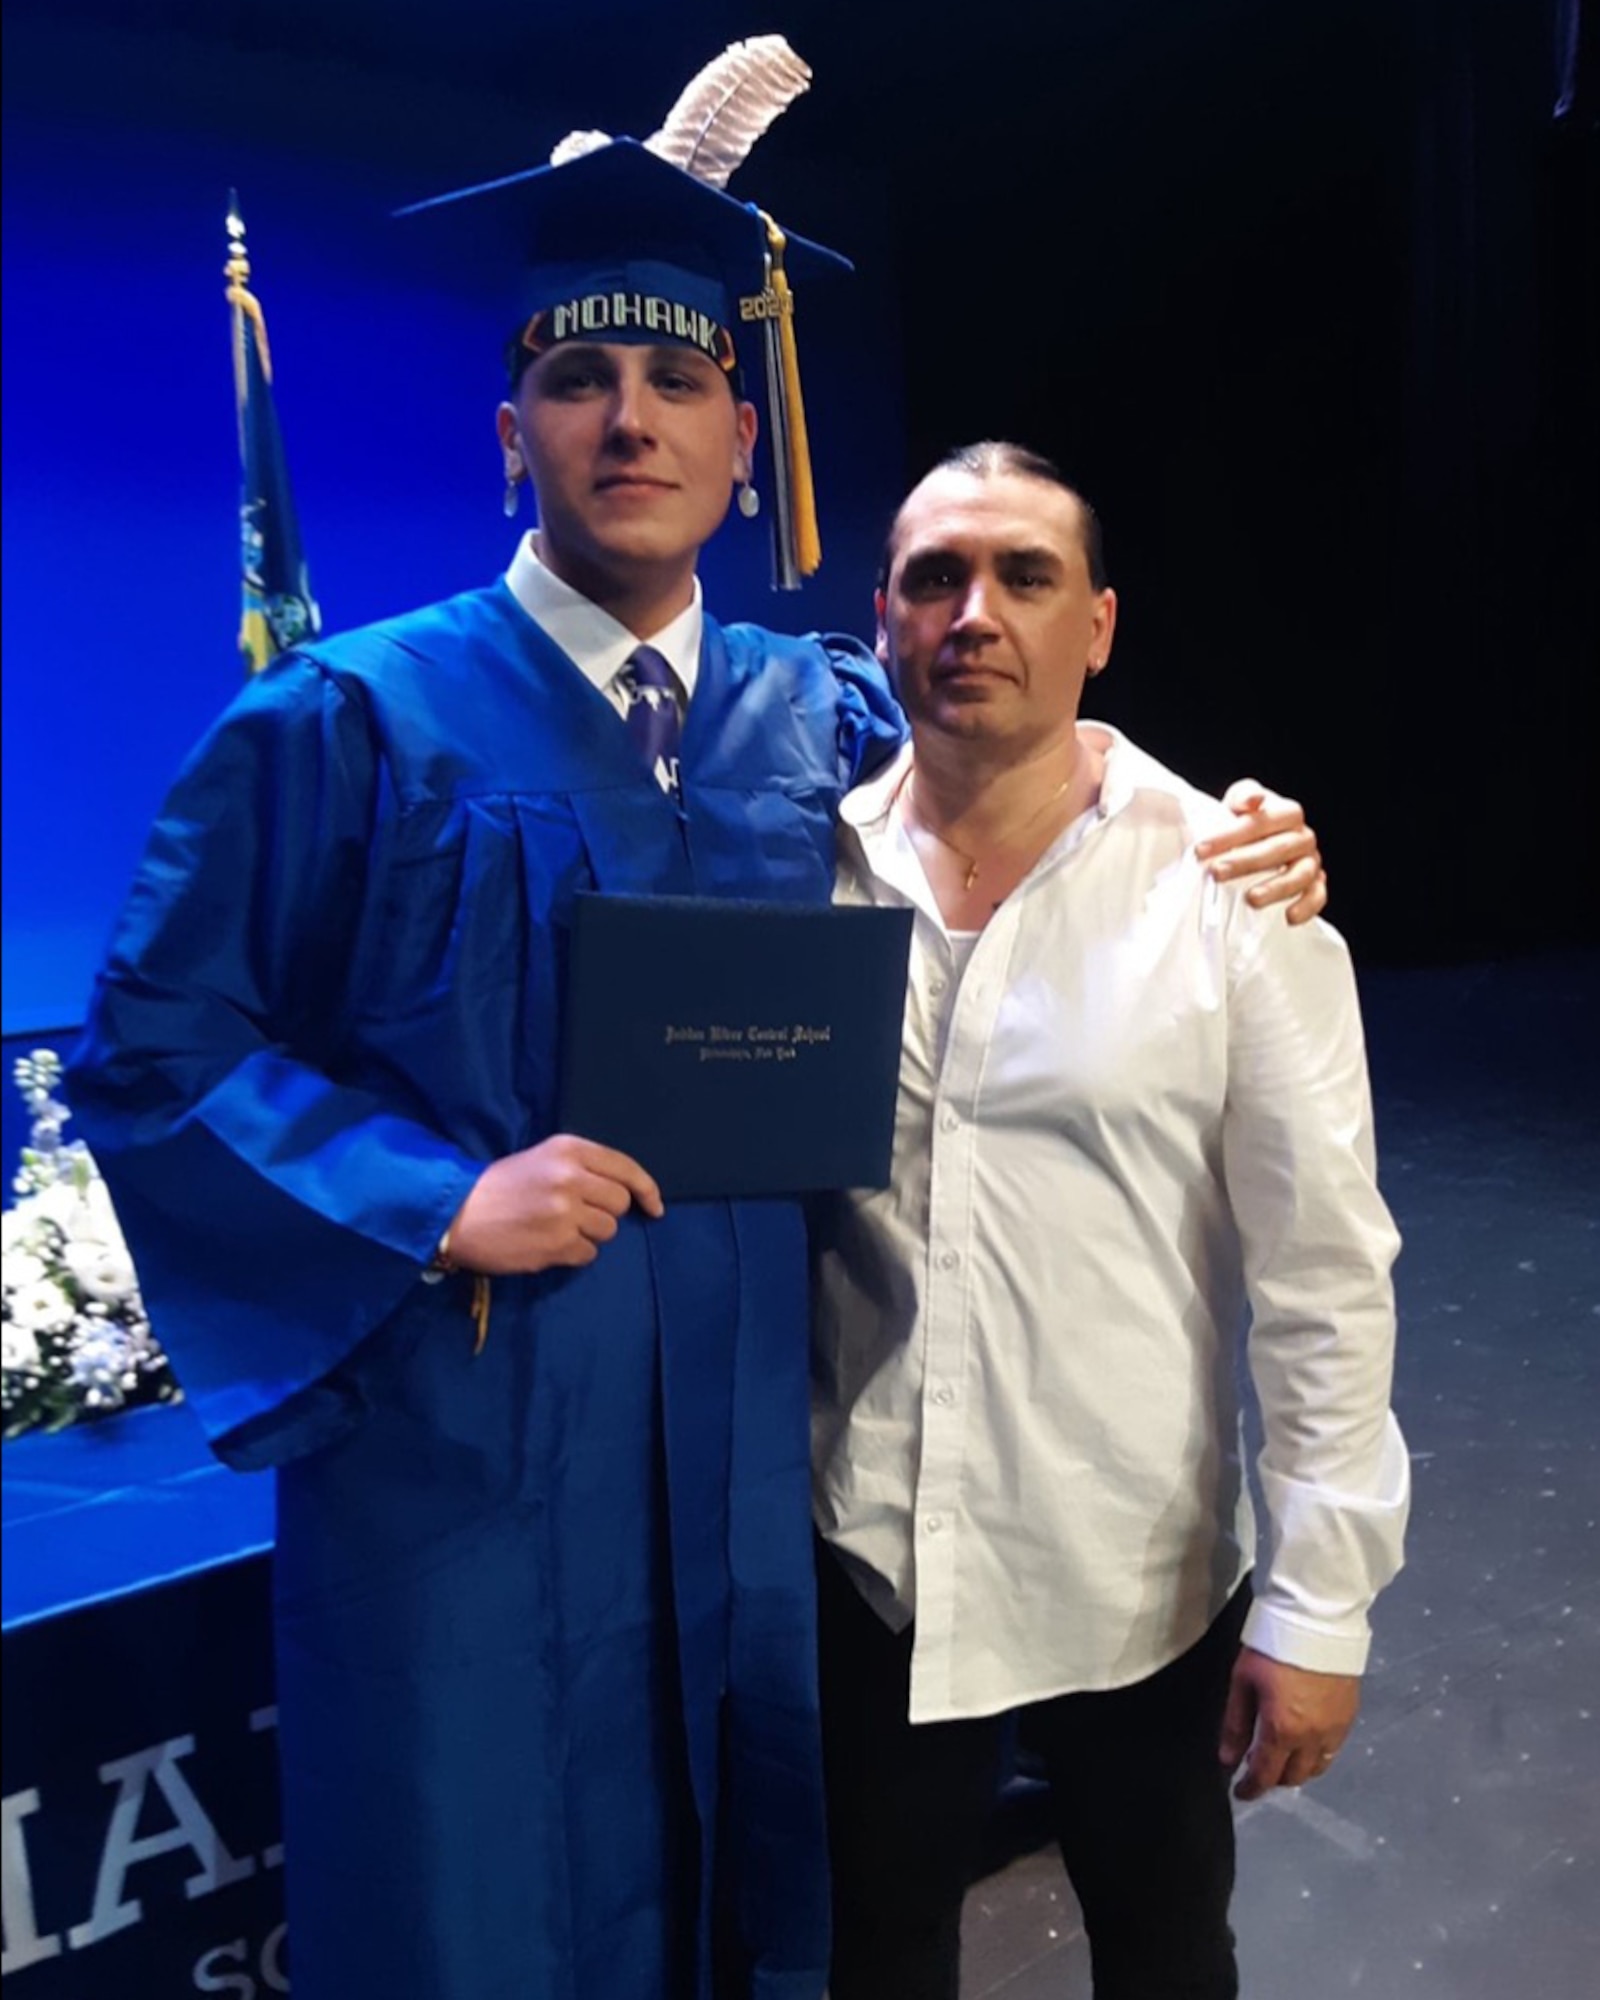 Connor Crawn, left, stands beside his father, Michael Crawn, following his graduation ceremony at Indian River High School, New York, in May, 2022. Connor joined the Air Force in January
of 2021 and now serves as an airman 1st class at Malmstrom Air Force Base, Mont., in the 341st Missile Security Operations Squadron. (Courtesy photo)